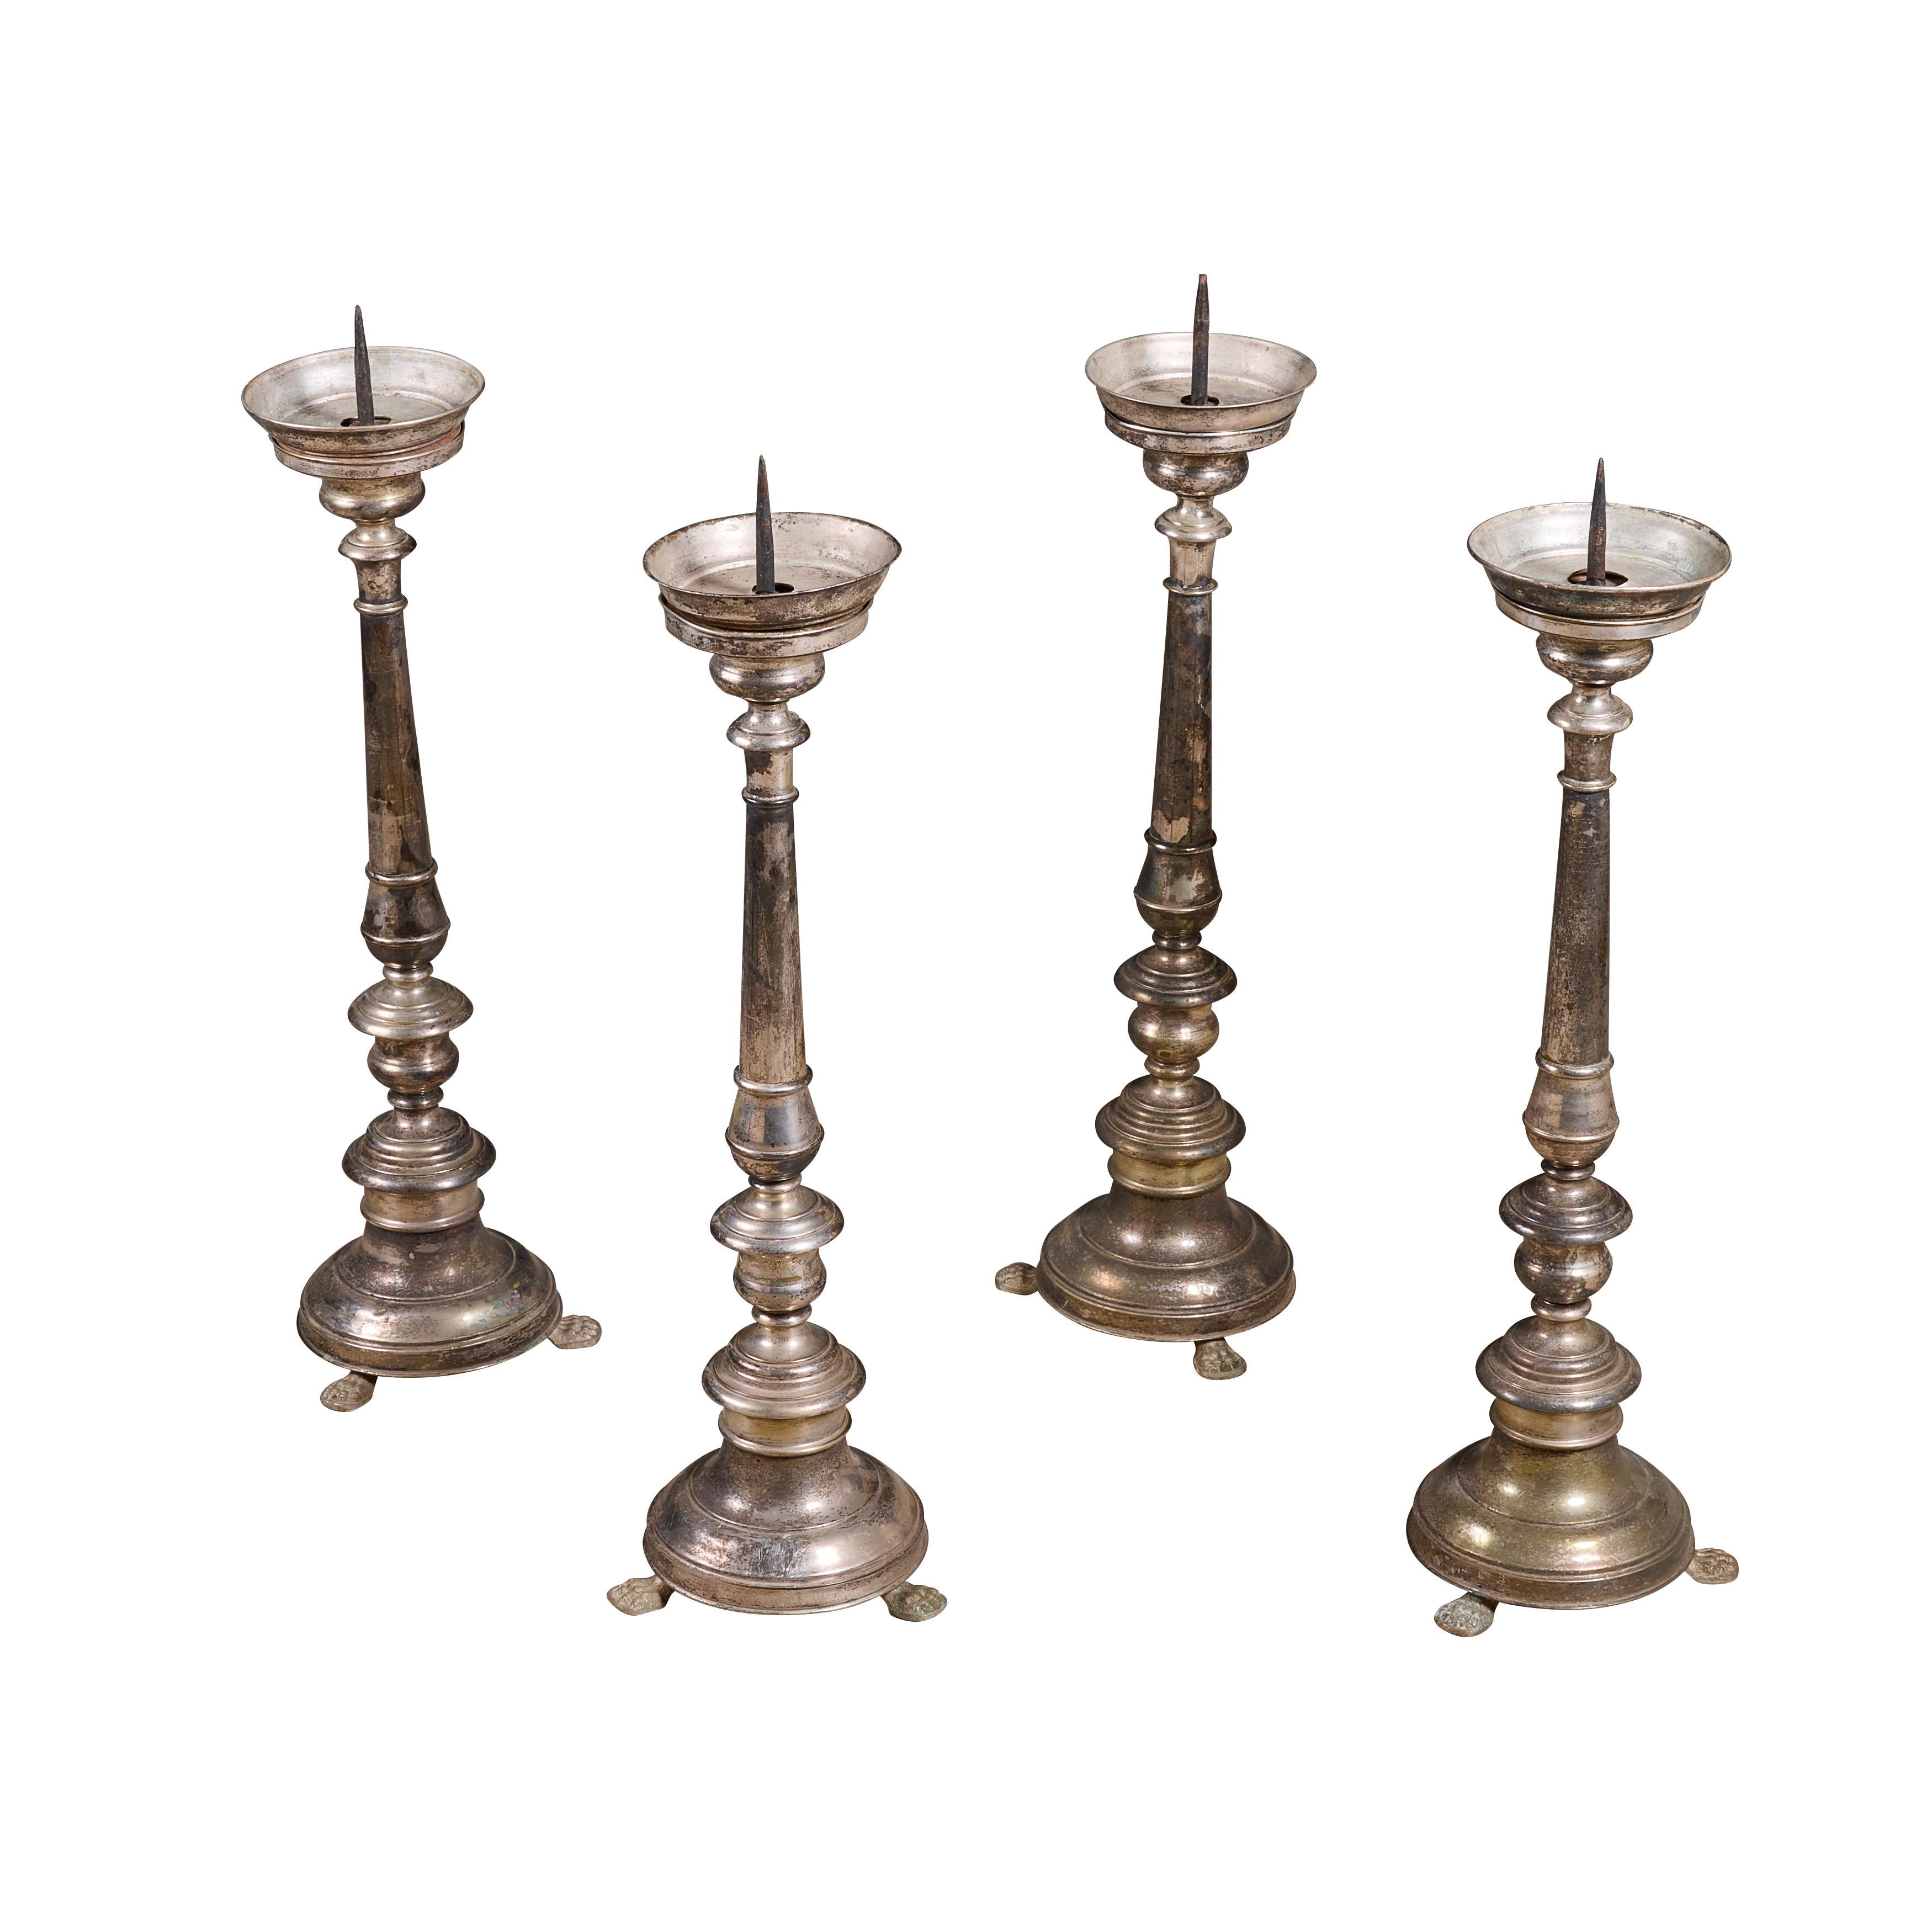 Set of four metal plated candle sticks with feet and great patina.

